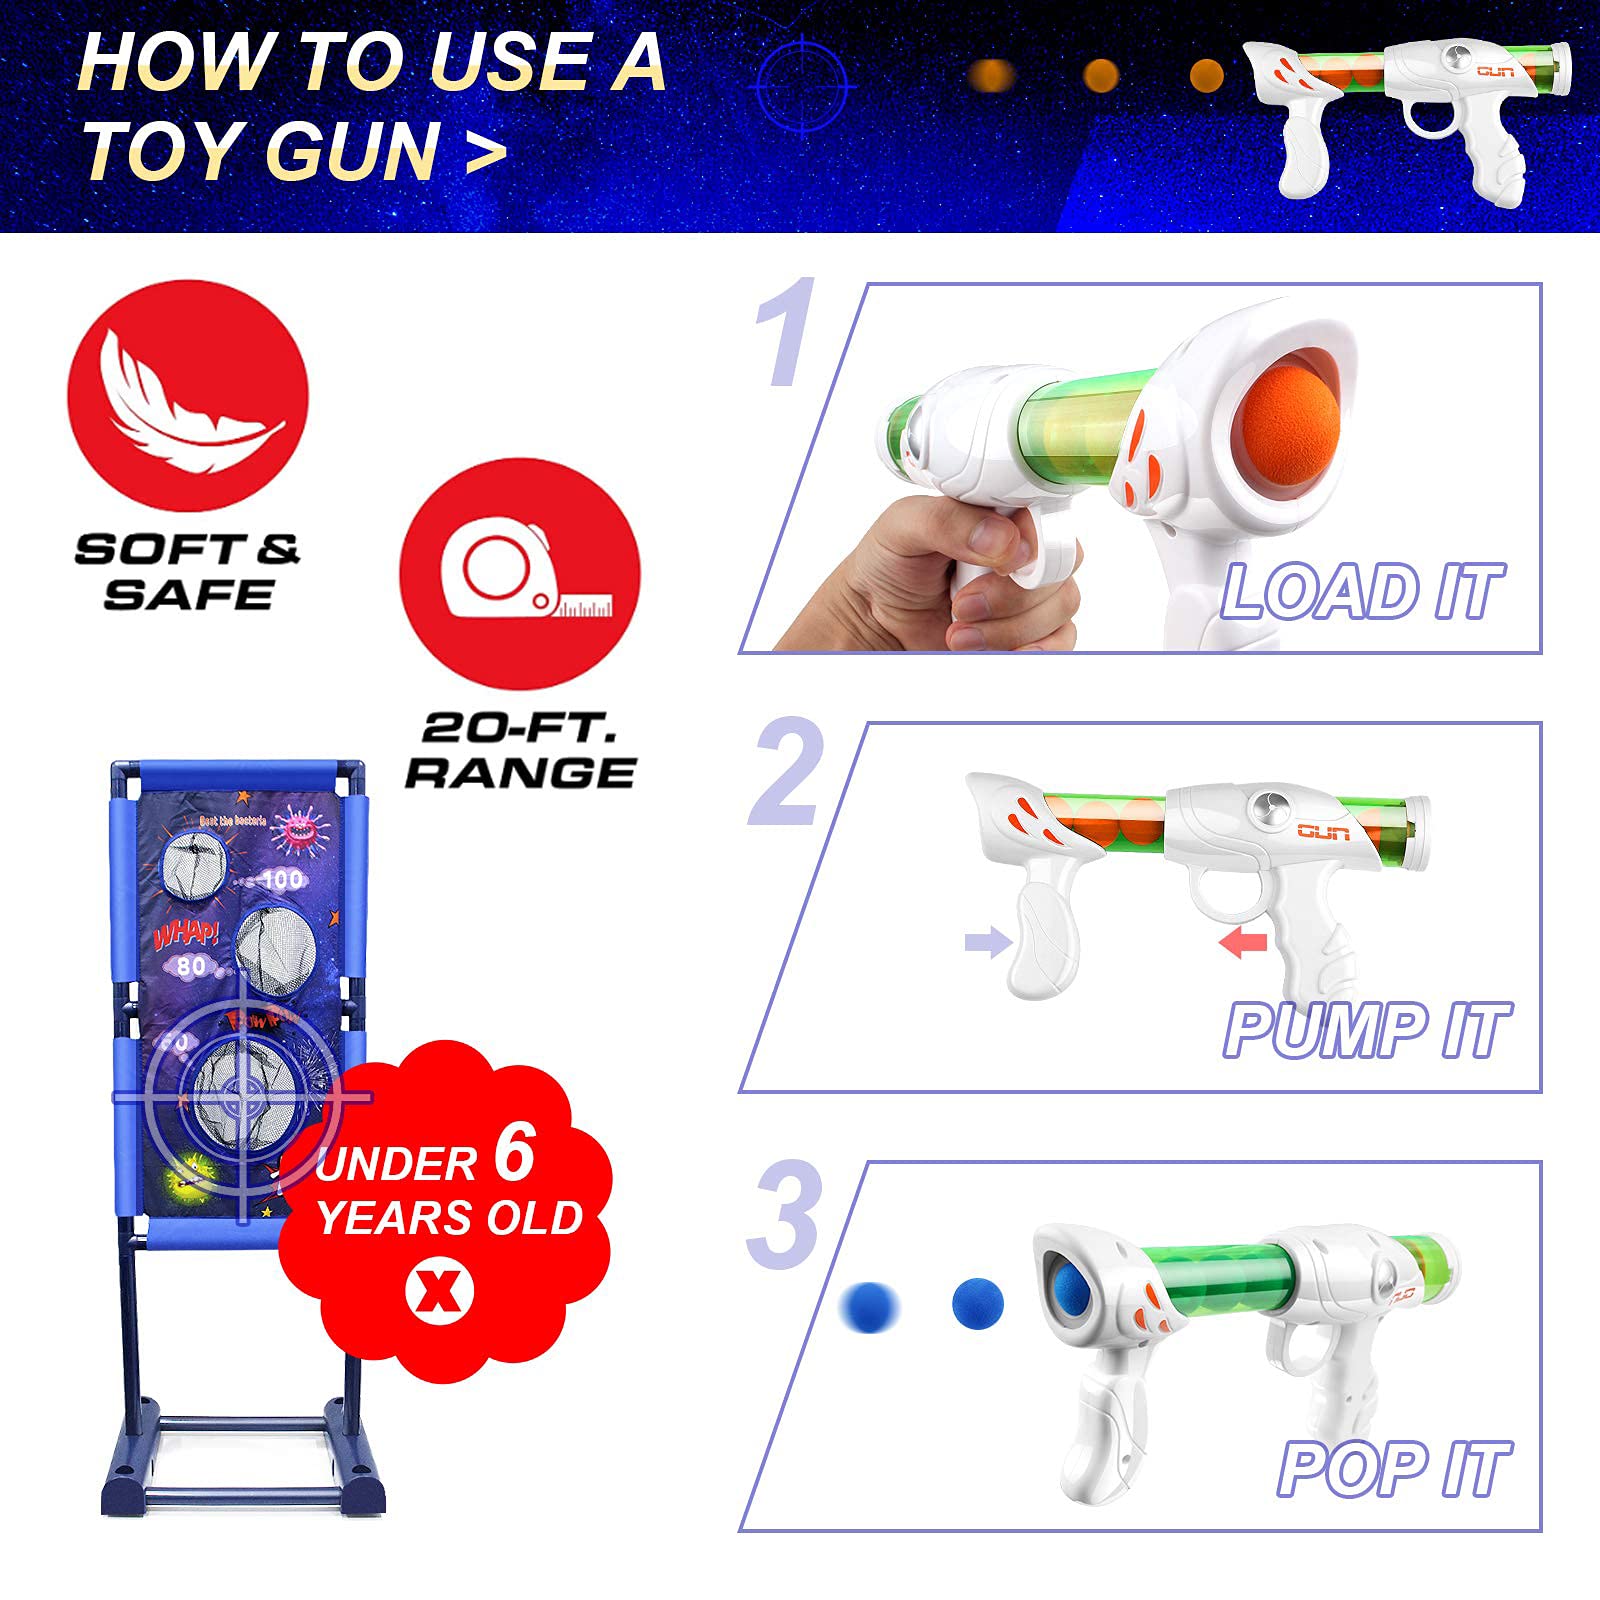 Kaufam Gun Toy Gift for Boys Age of 4 5 6 7 8 9 10 10+ Years Old Kids Girls for Birthday with Moving Shooting Target 2 Blaster Gun and 18 Foam Balls (Toy Gun Set)